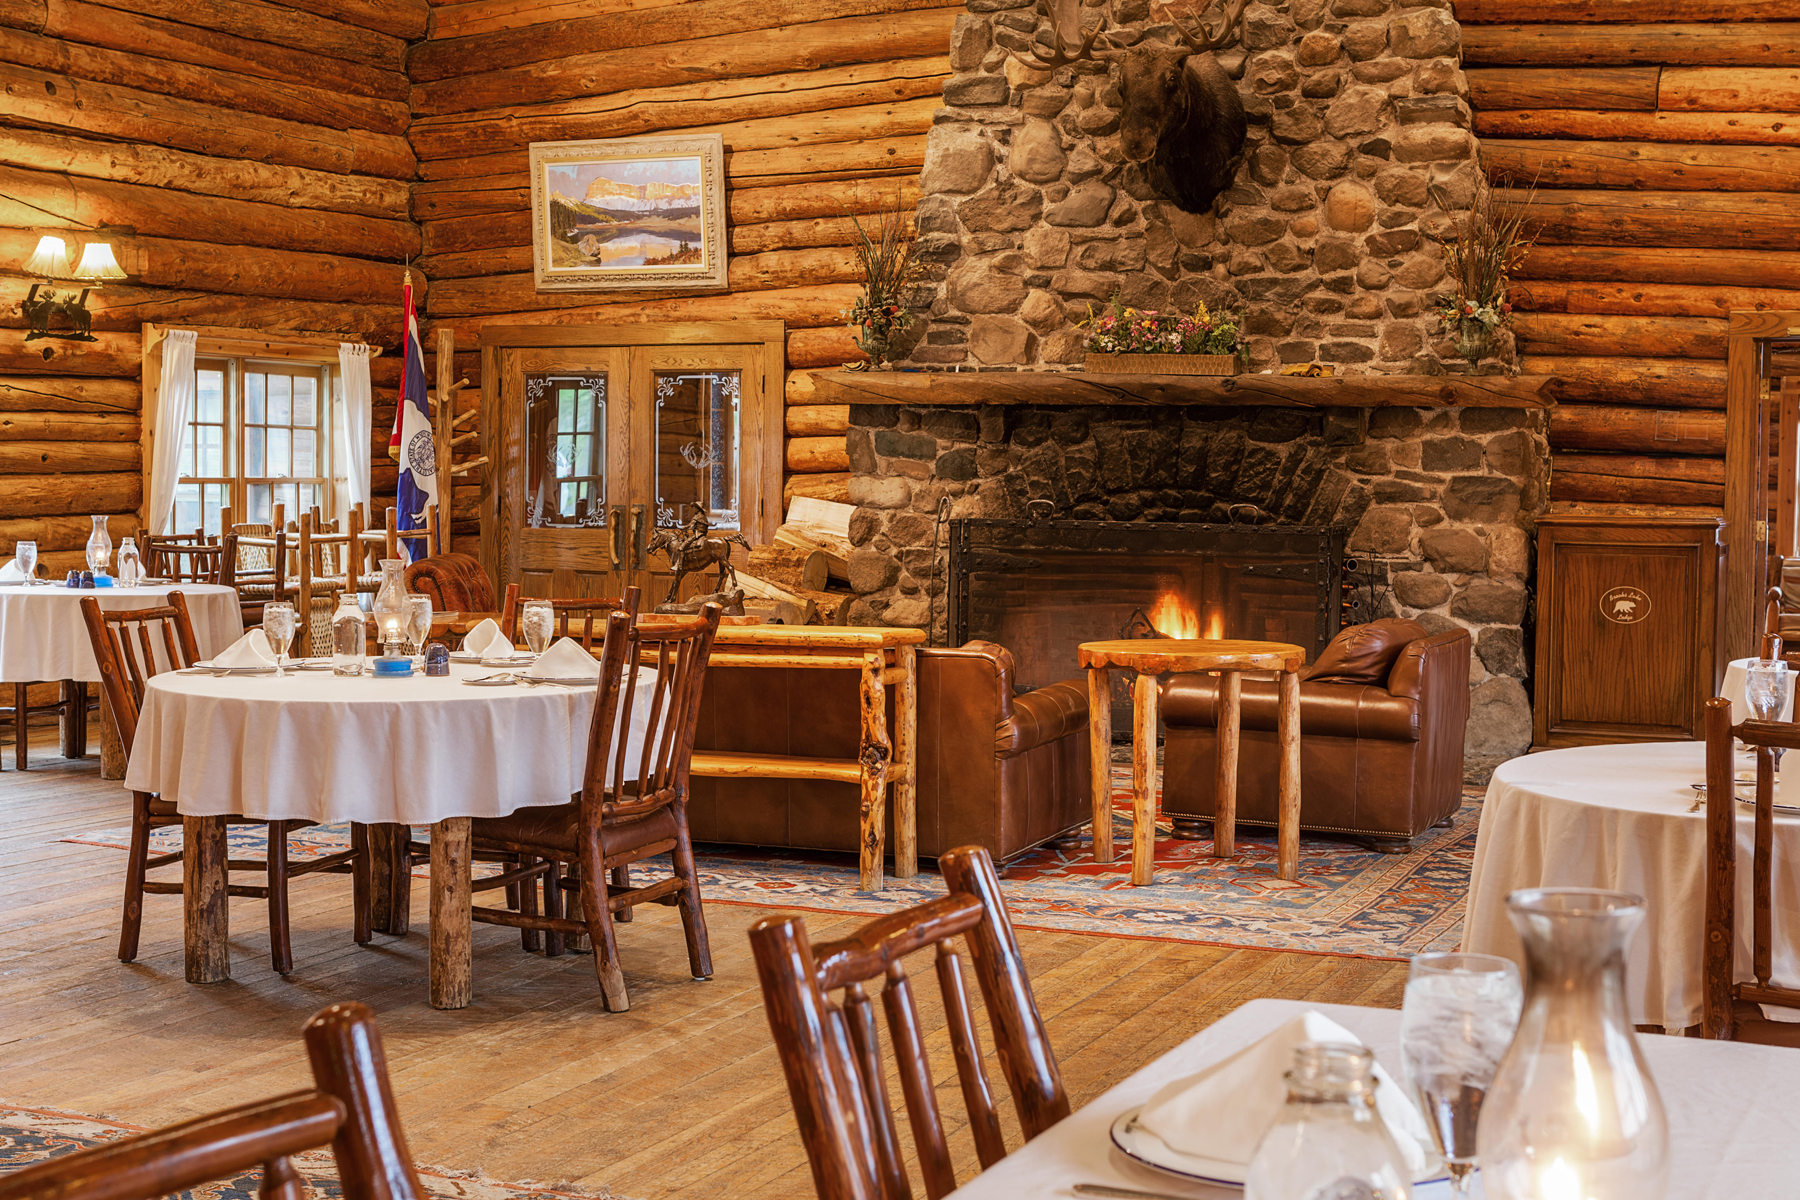 A stay at the all-inclusive Brooks Lake Lodge & Spa in Wyoming features three gourmet home-cooked meals daily in the rustic and elegant historical dining hall before a giant crackling fire.